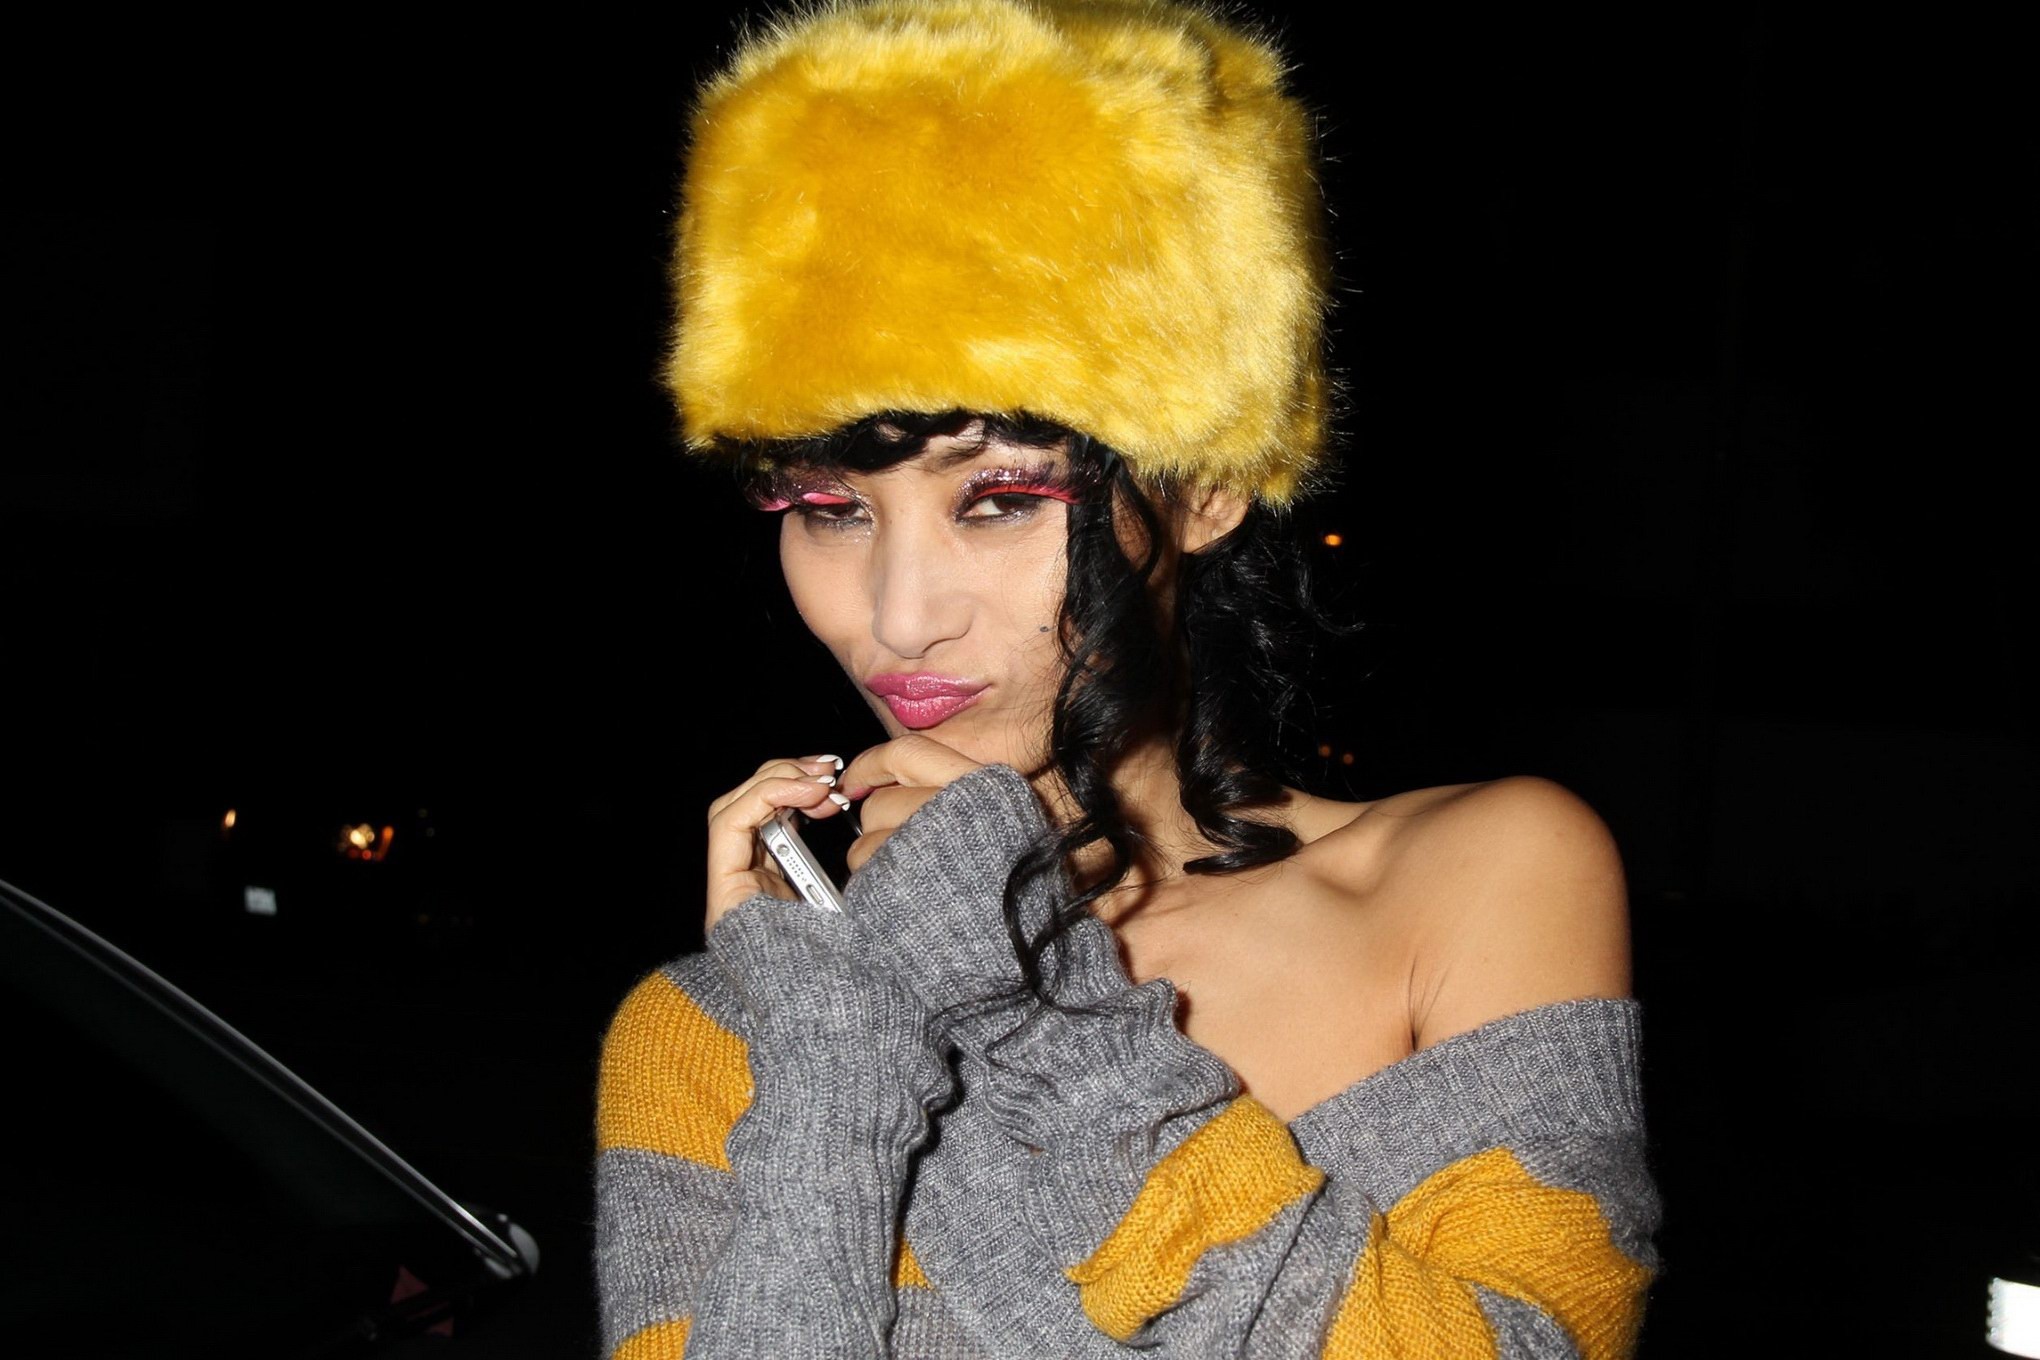 Bai Ling braless wearing a knitted see through dress at Greystone Manor in West  #75244933